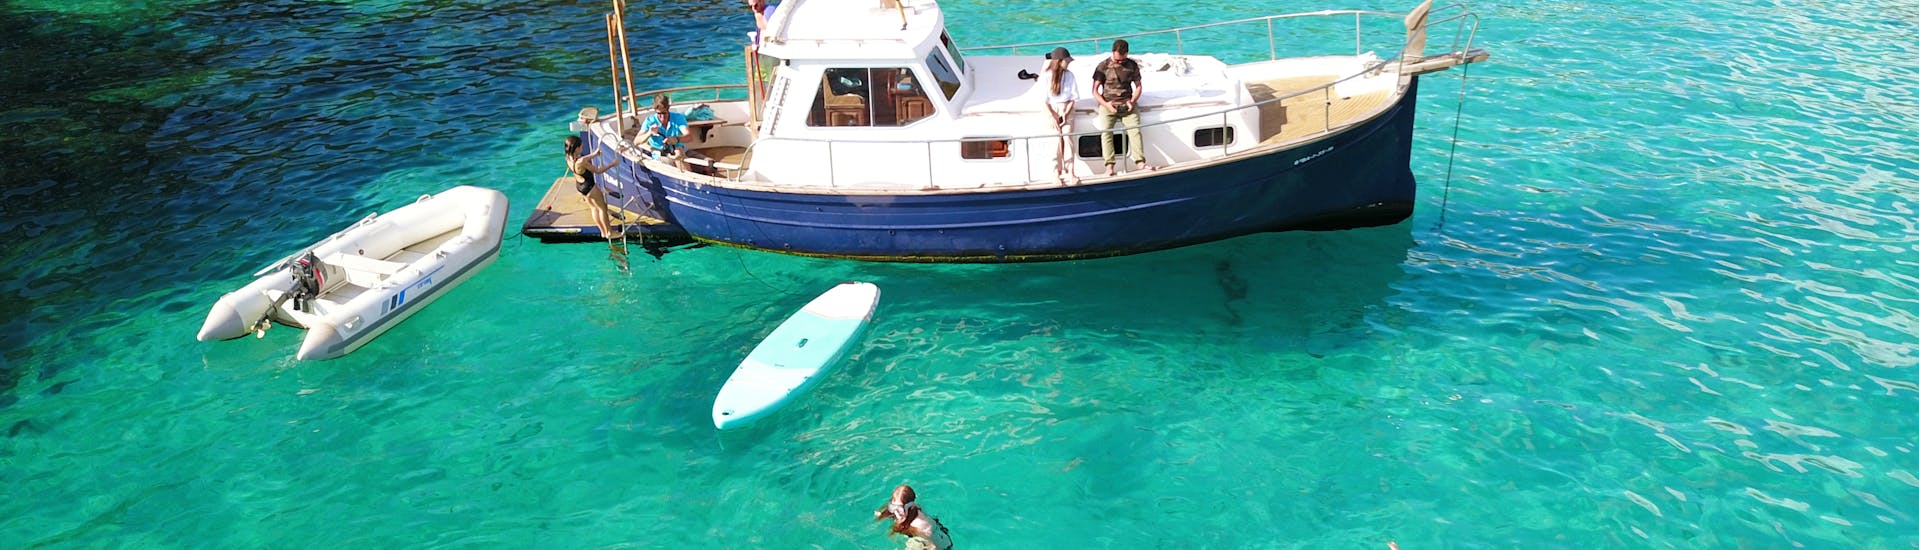 People having fun in turquoise waters during Private Boat Trip from Cala Galdana with Snorkeling & SUP.